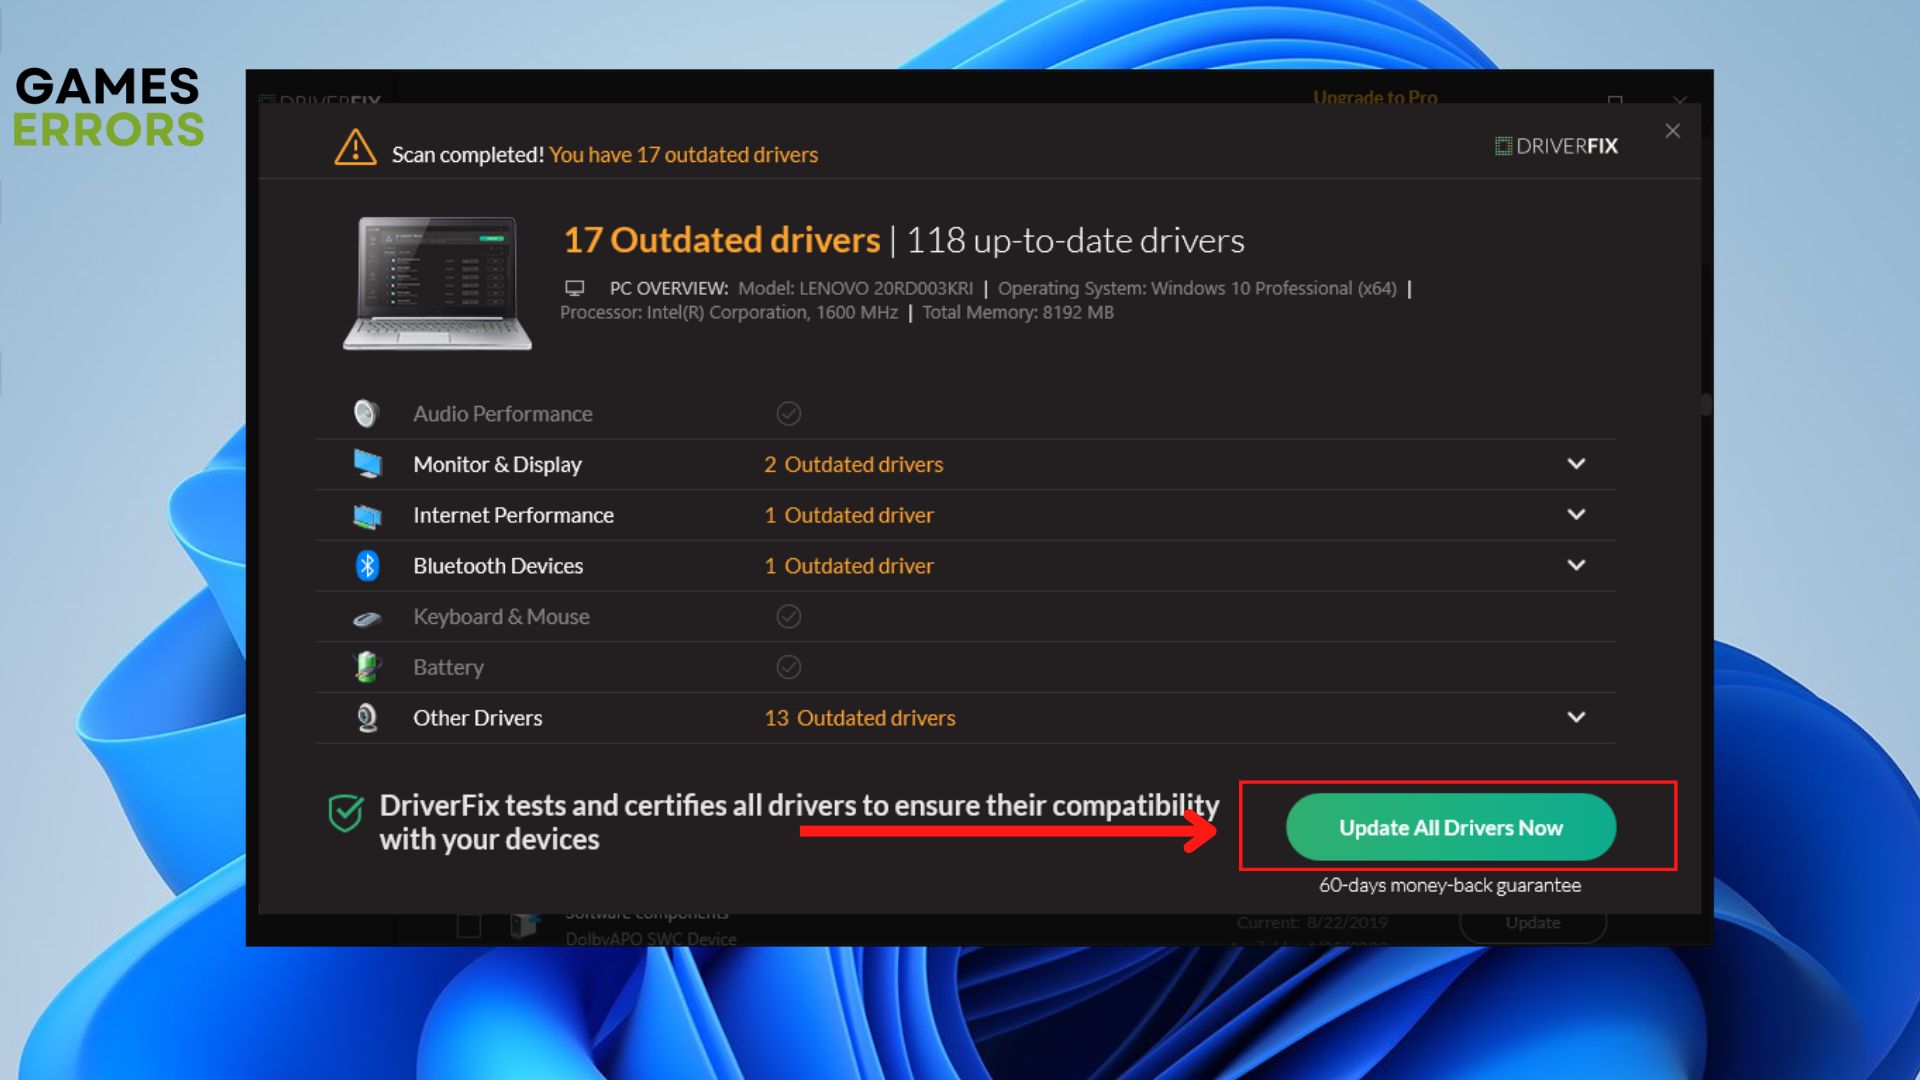 Update Network Drivers: Ensure your network drivers are up to date to avoid compatibility issues and improve network performance.
Verify Game Files: Verify the integrity of game files to fix any corrupted or missing files that may be causing the download error.